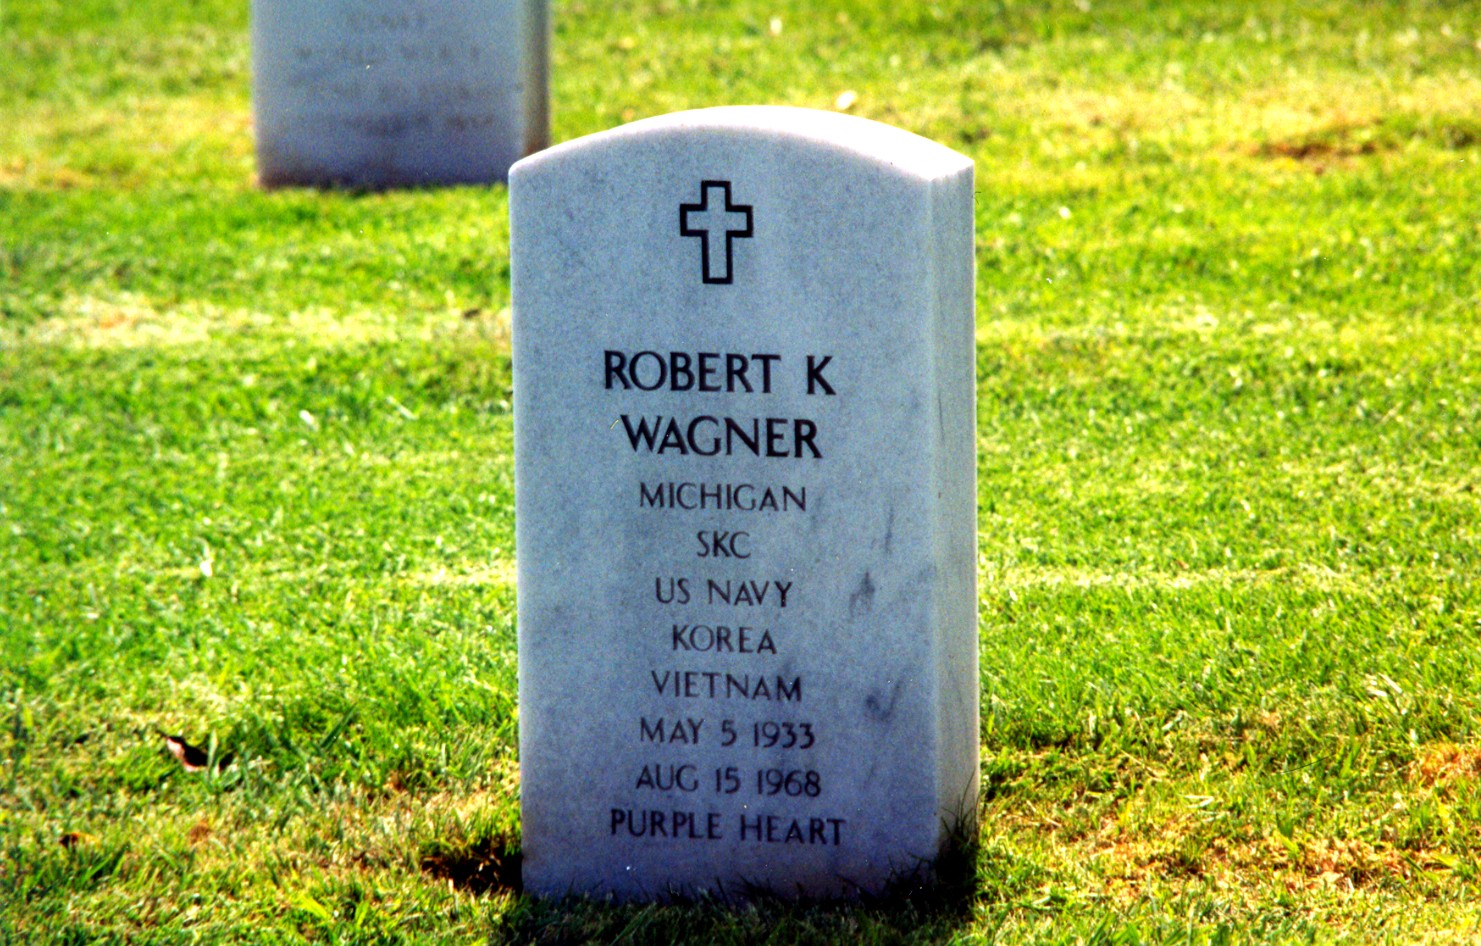 R. Wagner's grave